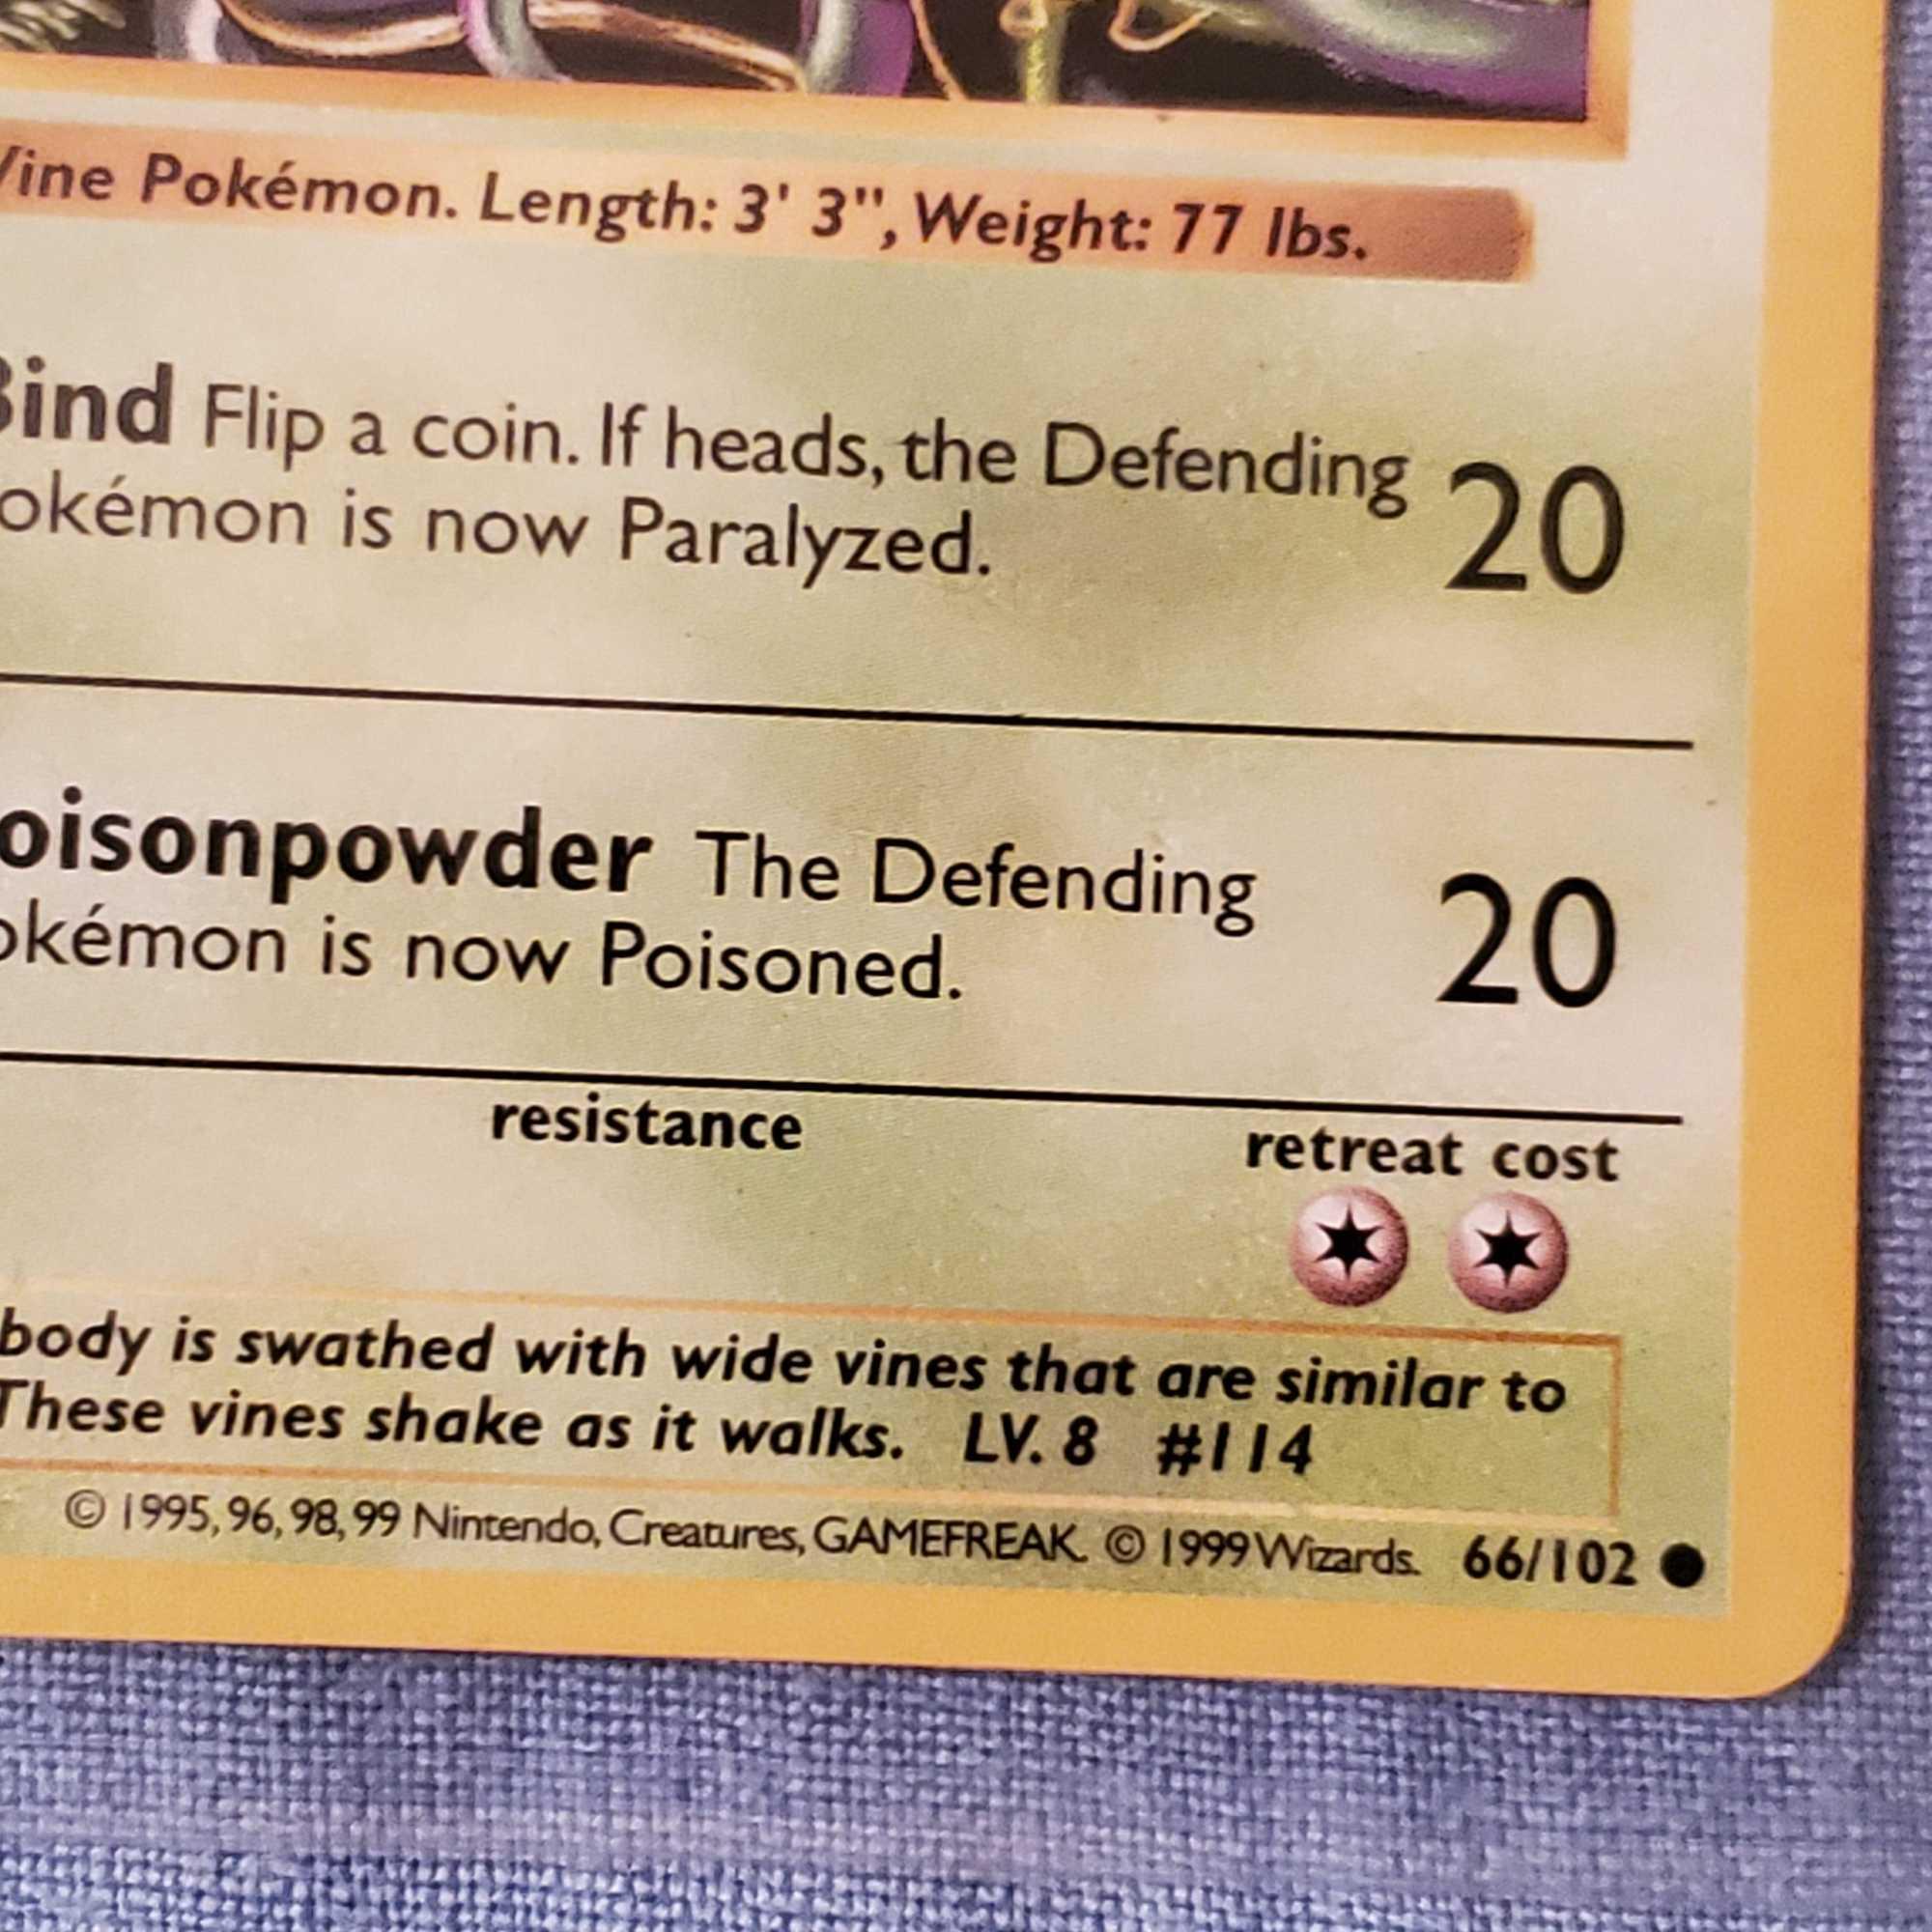 Album of 1999-2000 Pokemon Cards - Base, Jungle, Fossil, and Team Rocket